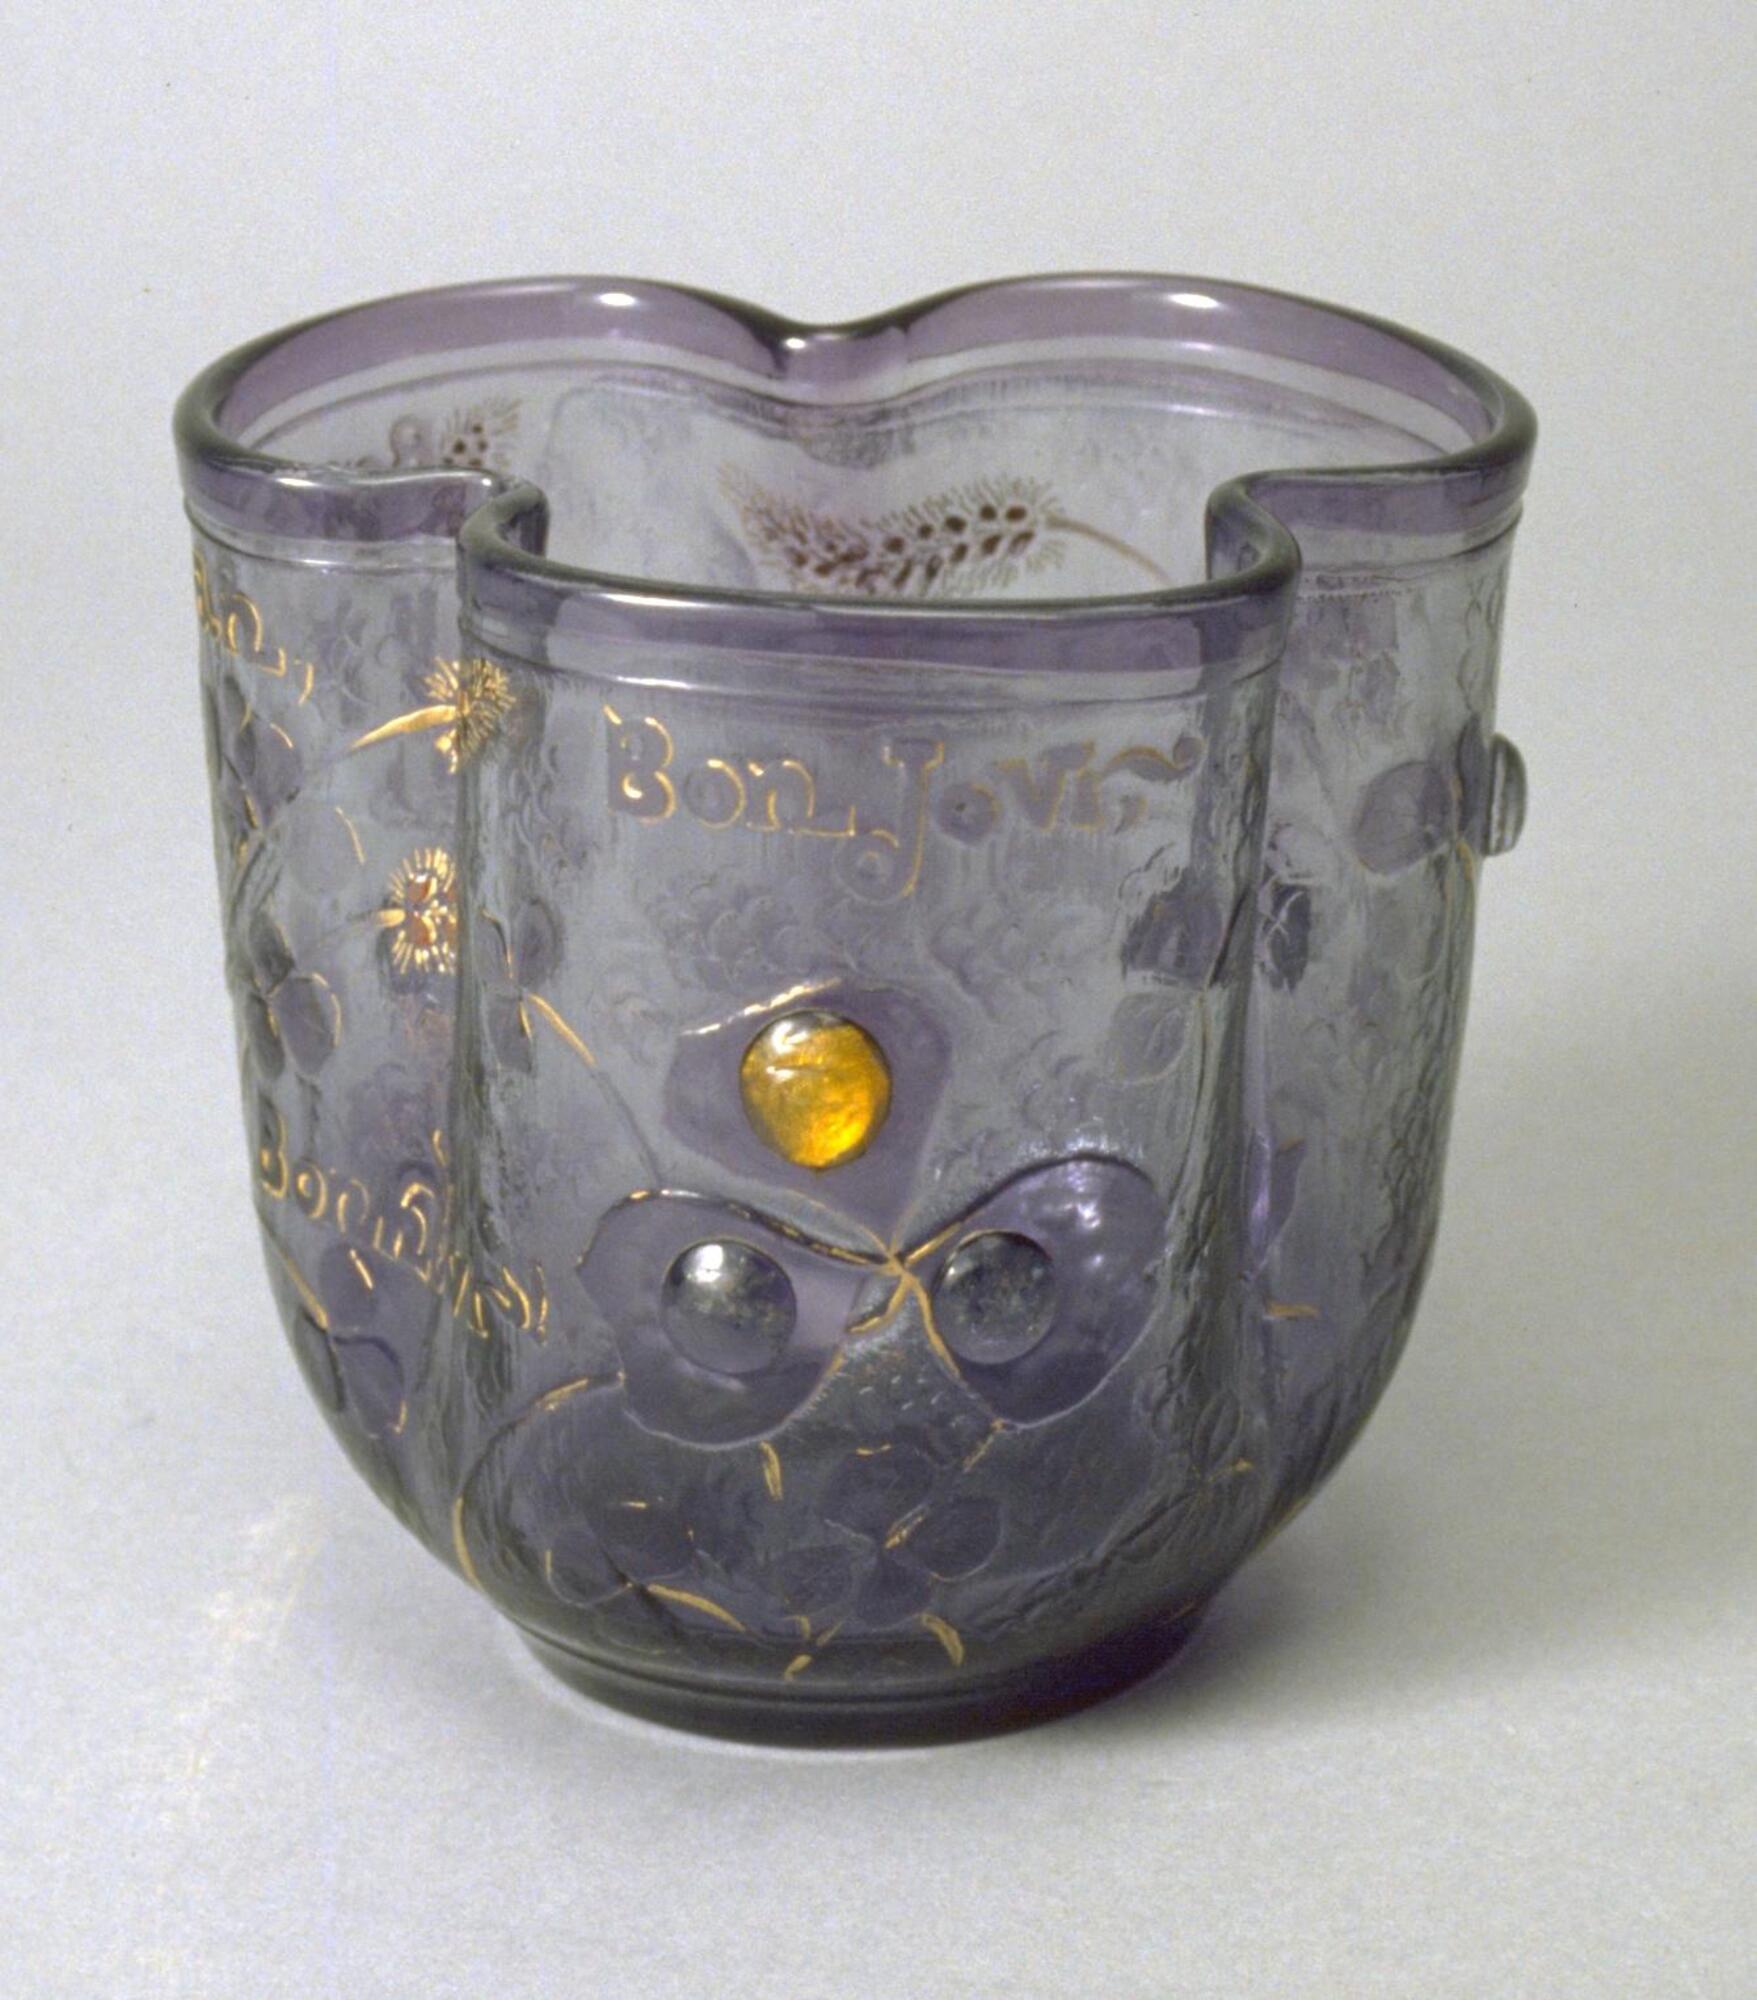 Vessel with trefoil, or three-lobed, shape of transparent blue glass with an intricate plant-motif decoration and gold accents. <br />